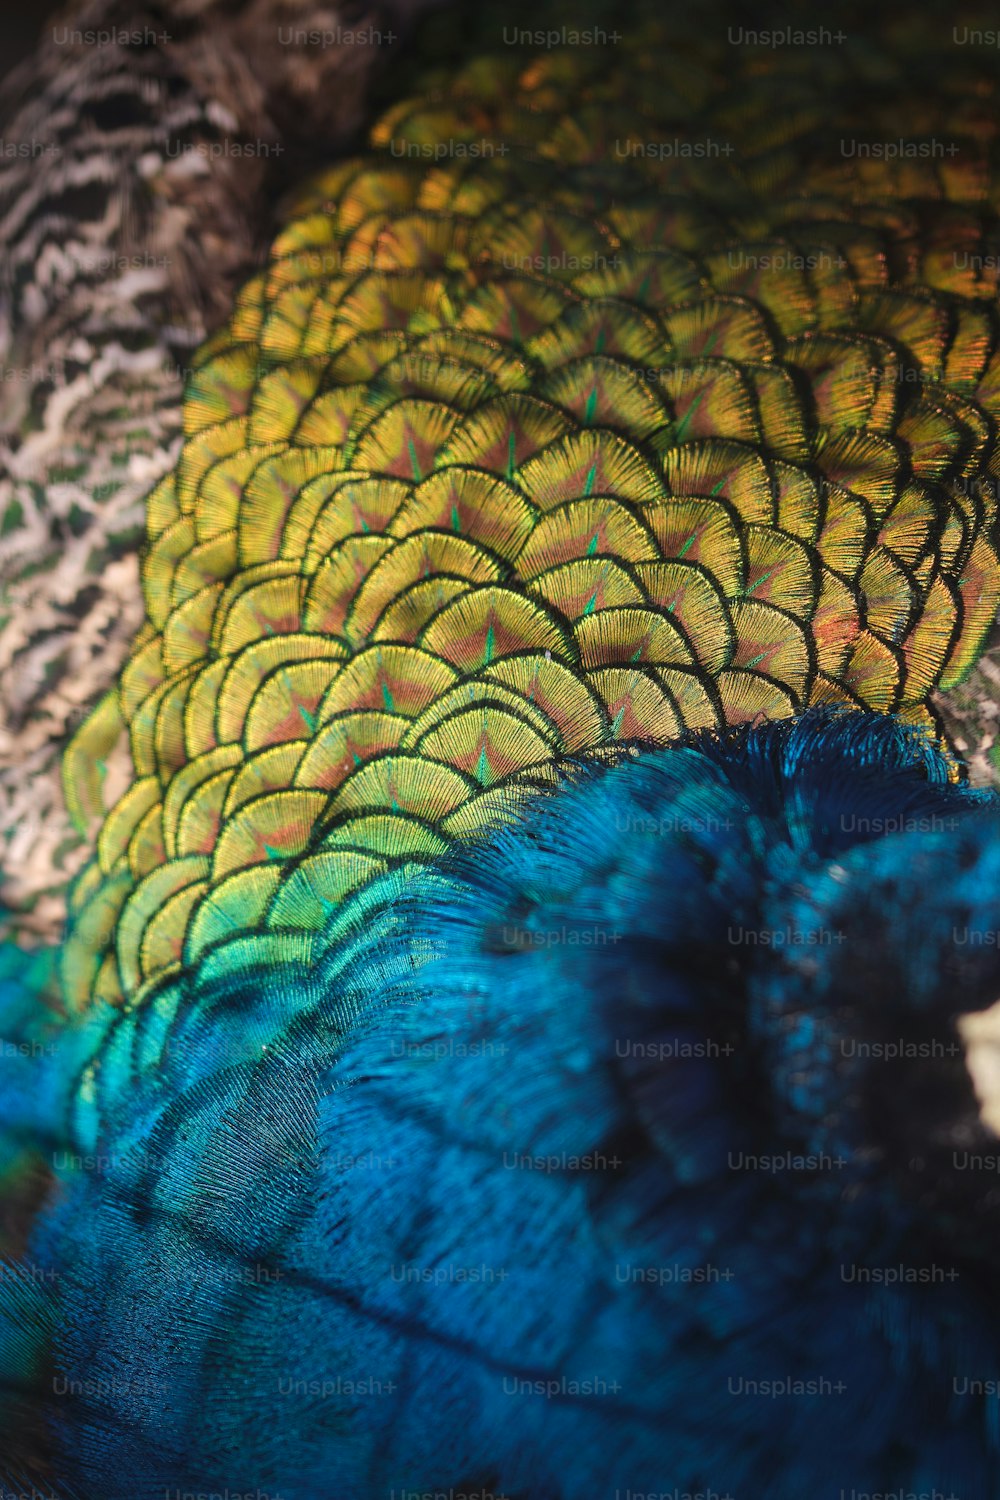 Colorful peacock feather - a Royalty Free Stock Photo from Photocase